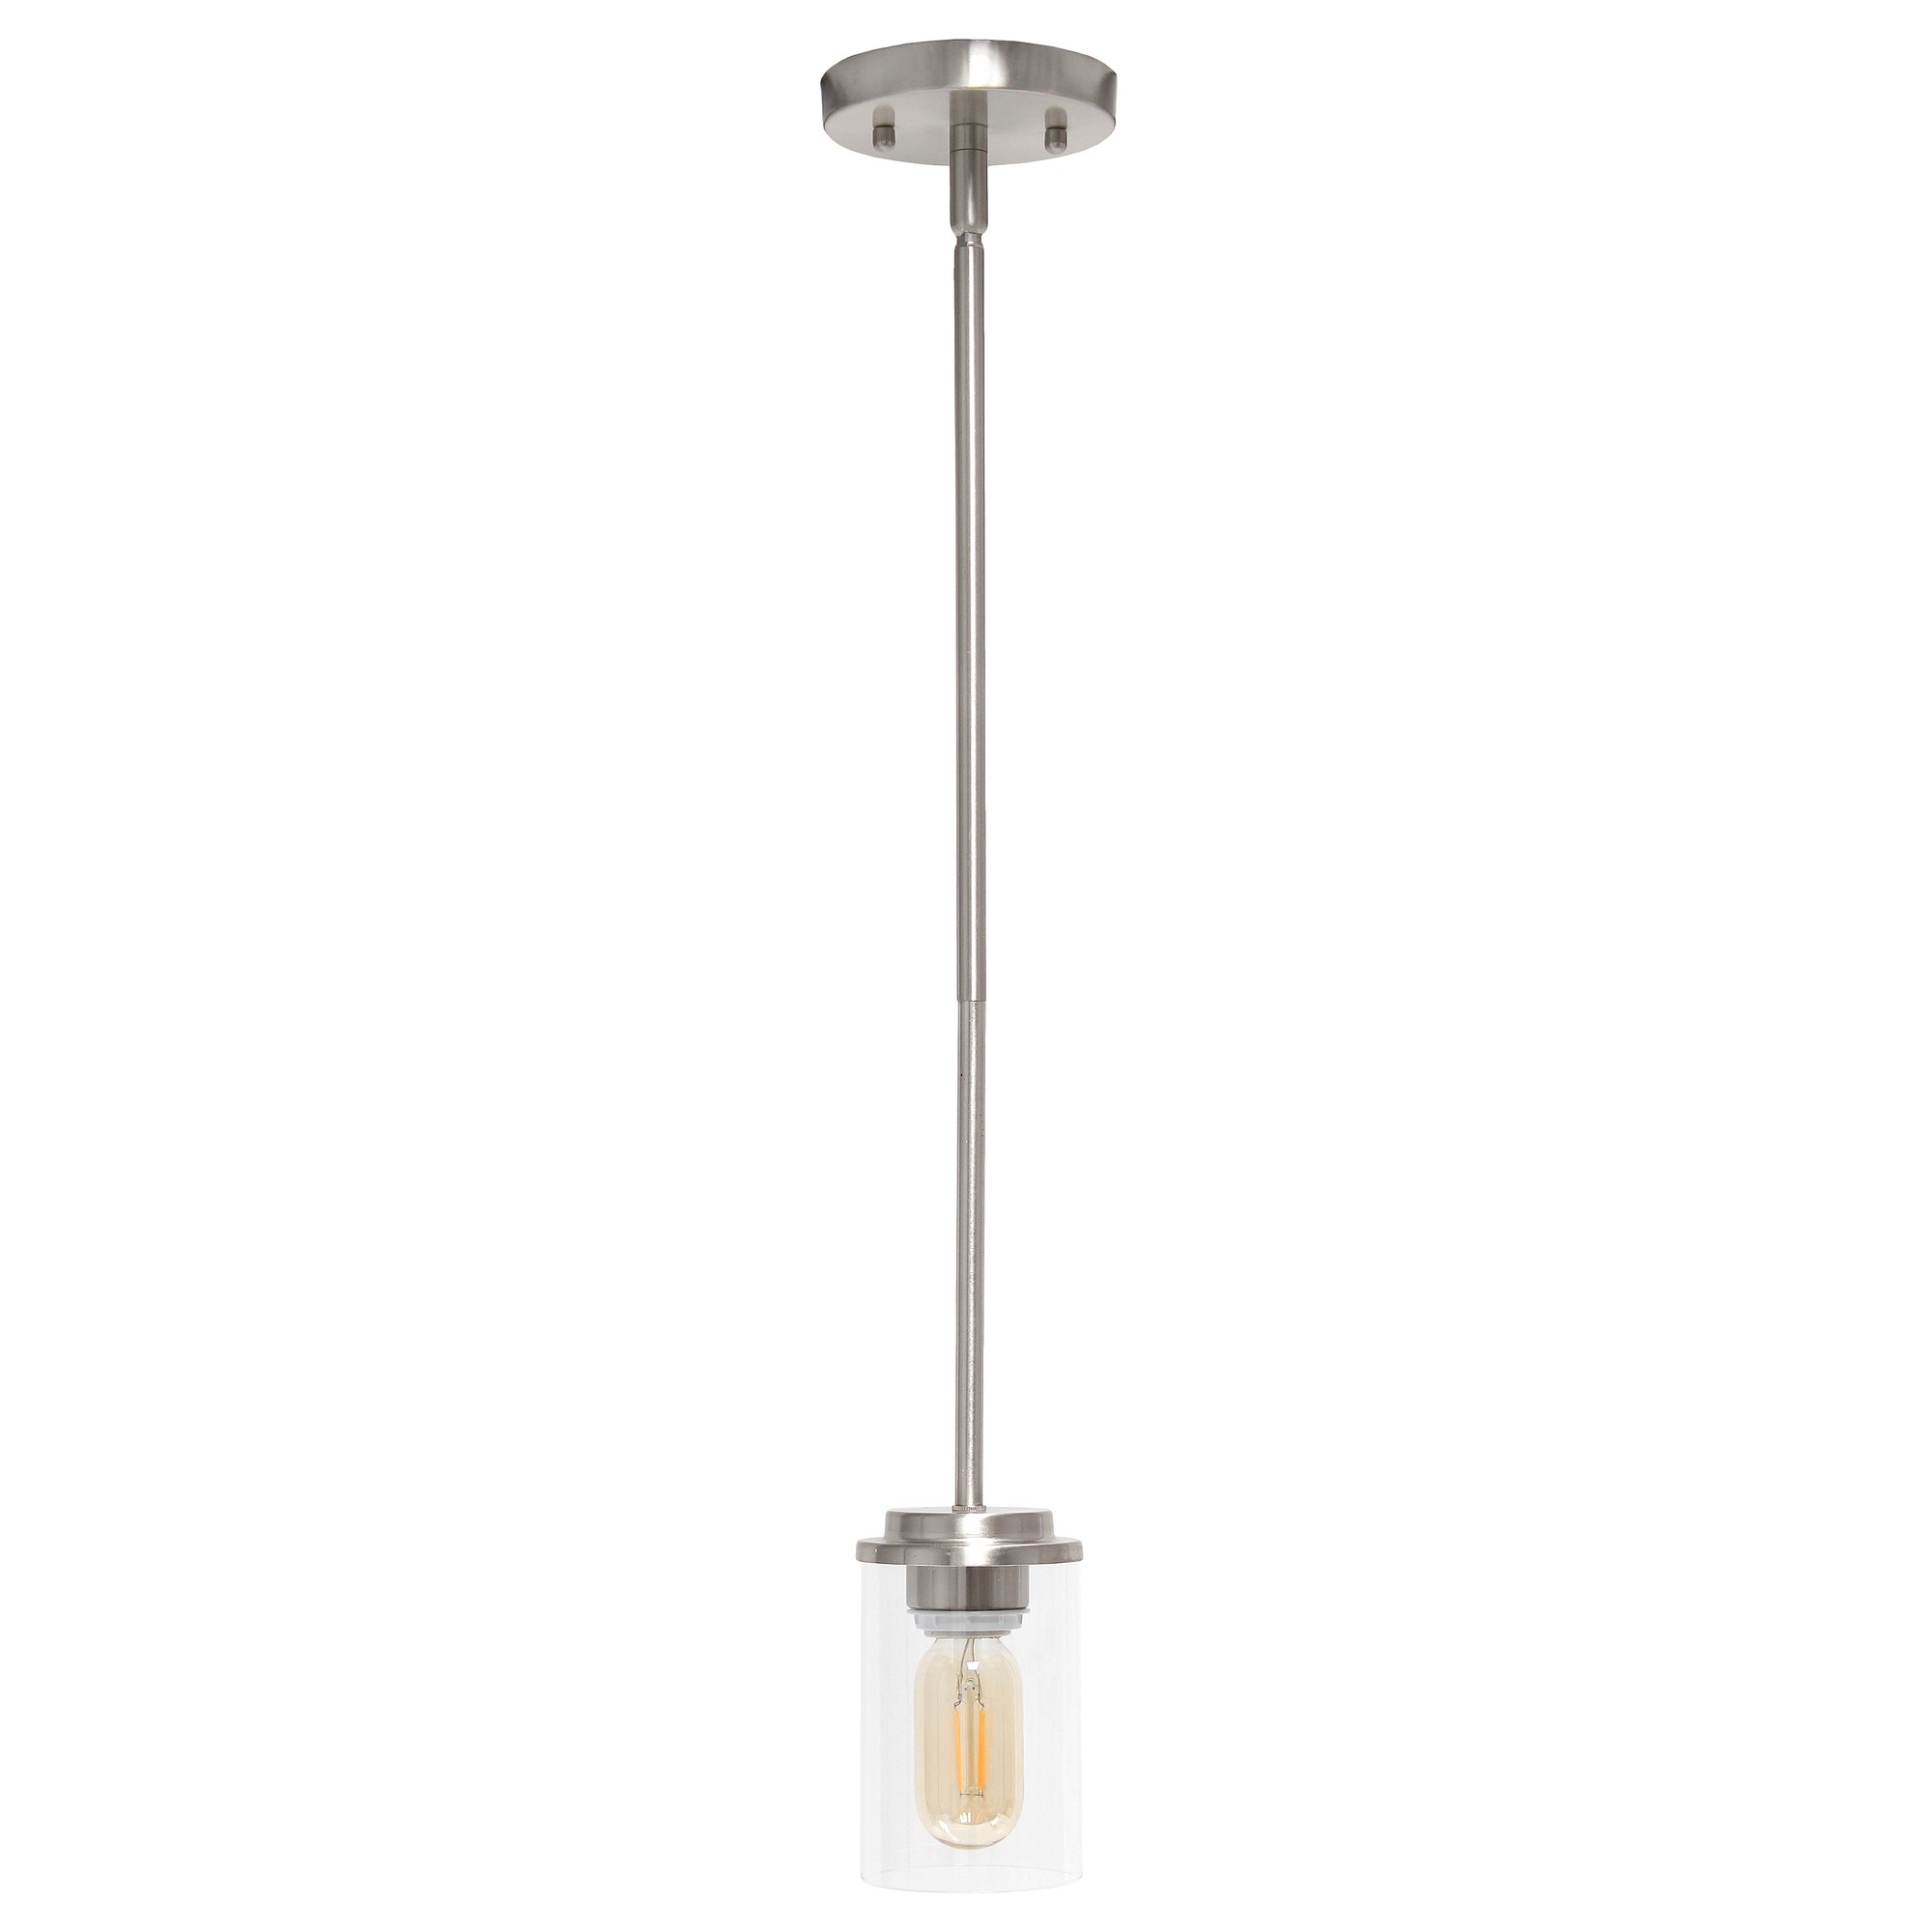 Lalia Home 1-Light 5.75" Minimalist Industrial Farmhouse Adjustable Hanging Clear Cylinder Glass Pendant Fixture, Brushed Nickel